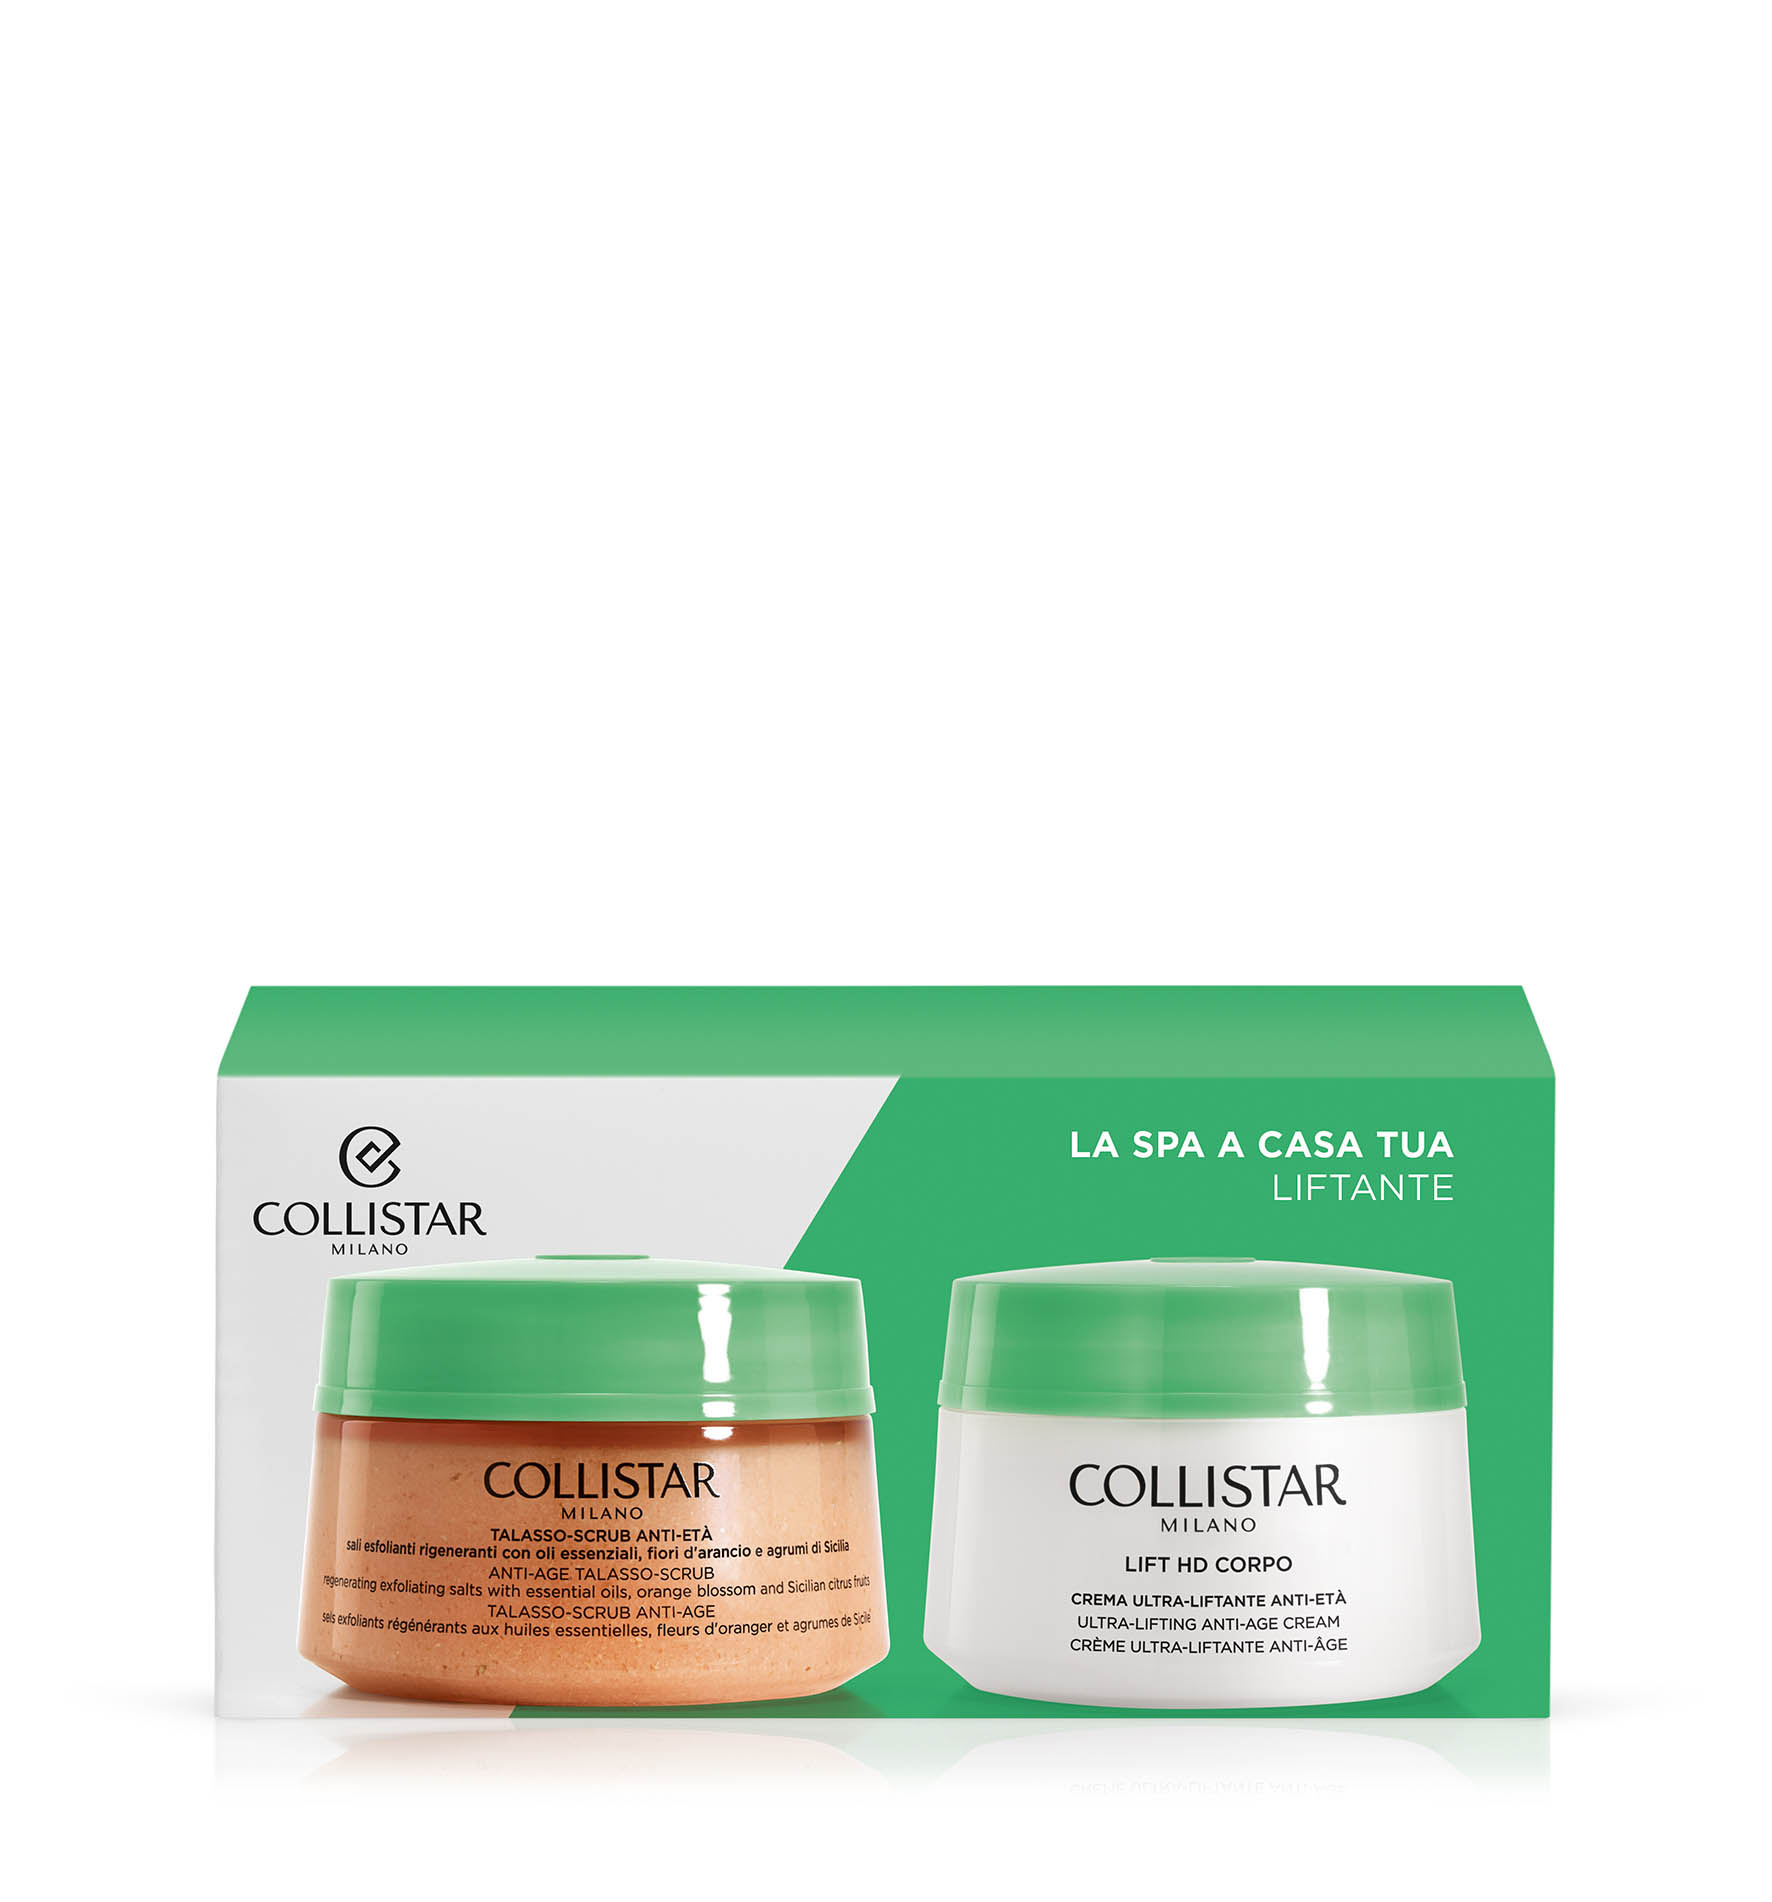 SET SPA AT HOME - LIFTING BODY ROUTINE - GIFT IDEAS | Collistar - Shop Online Ufficiale